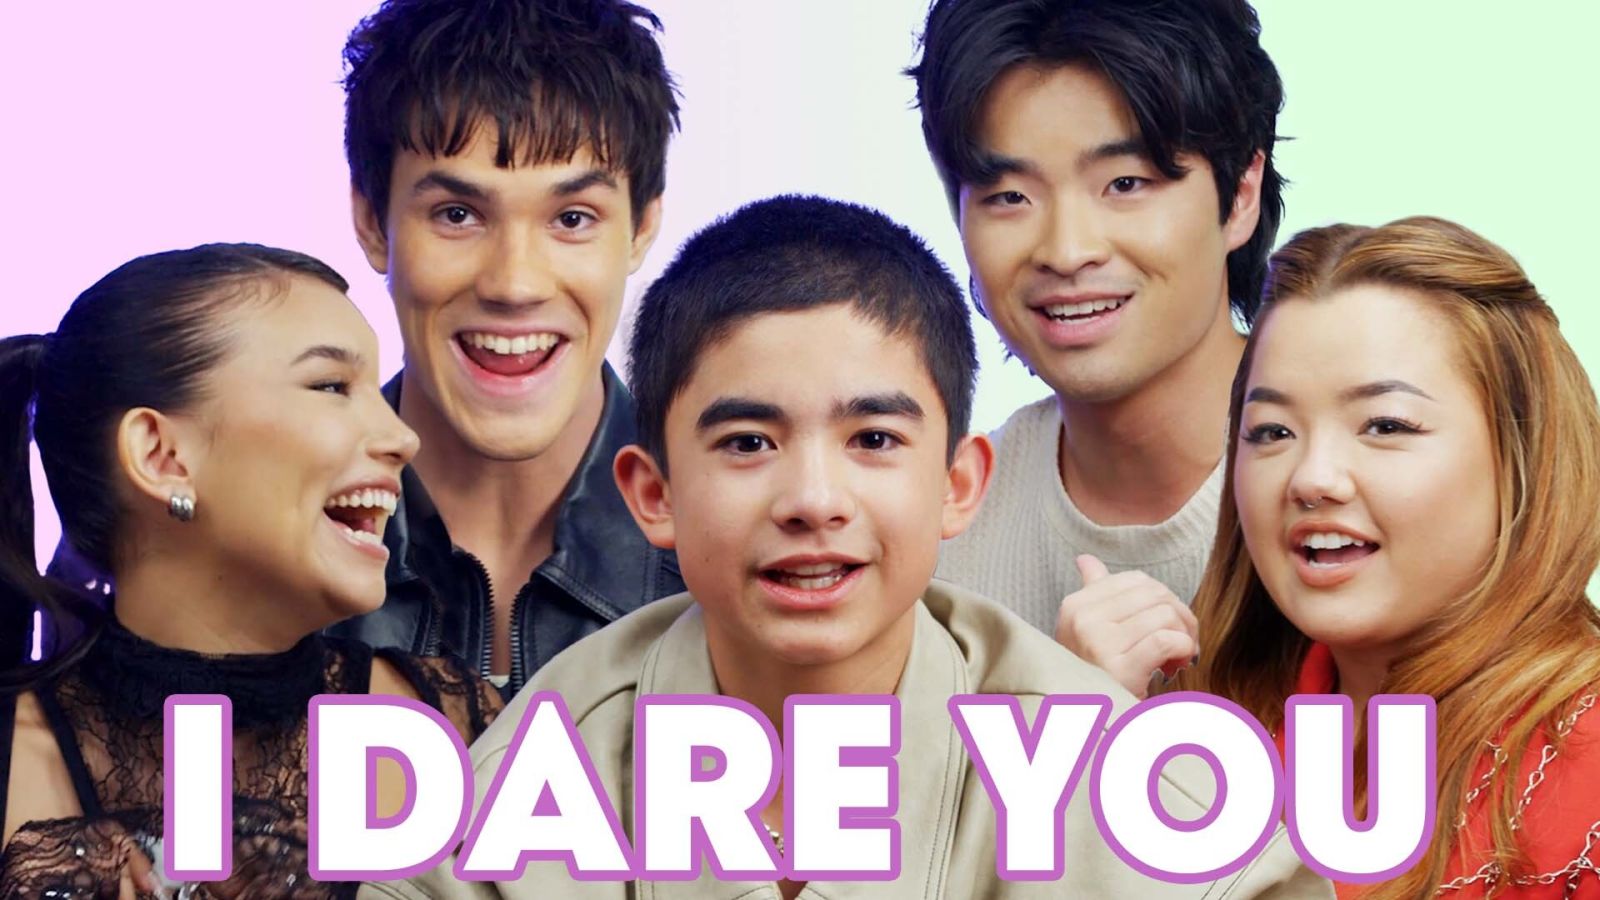 'Avatar: The Last Airbender' Cast Play "I Dare You"